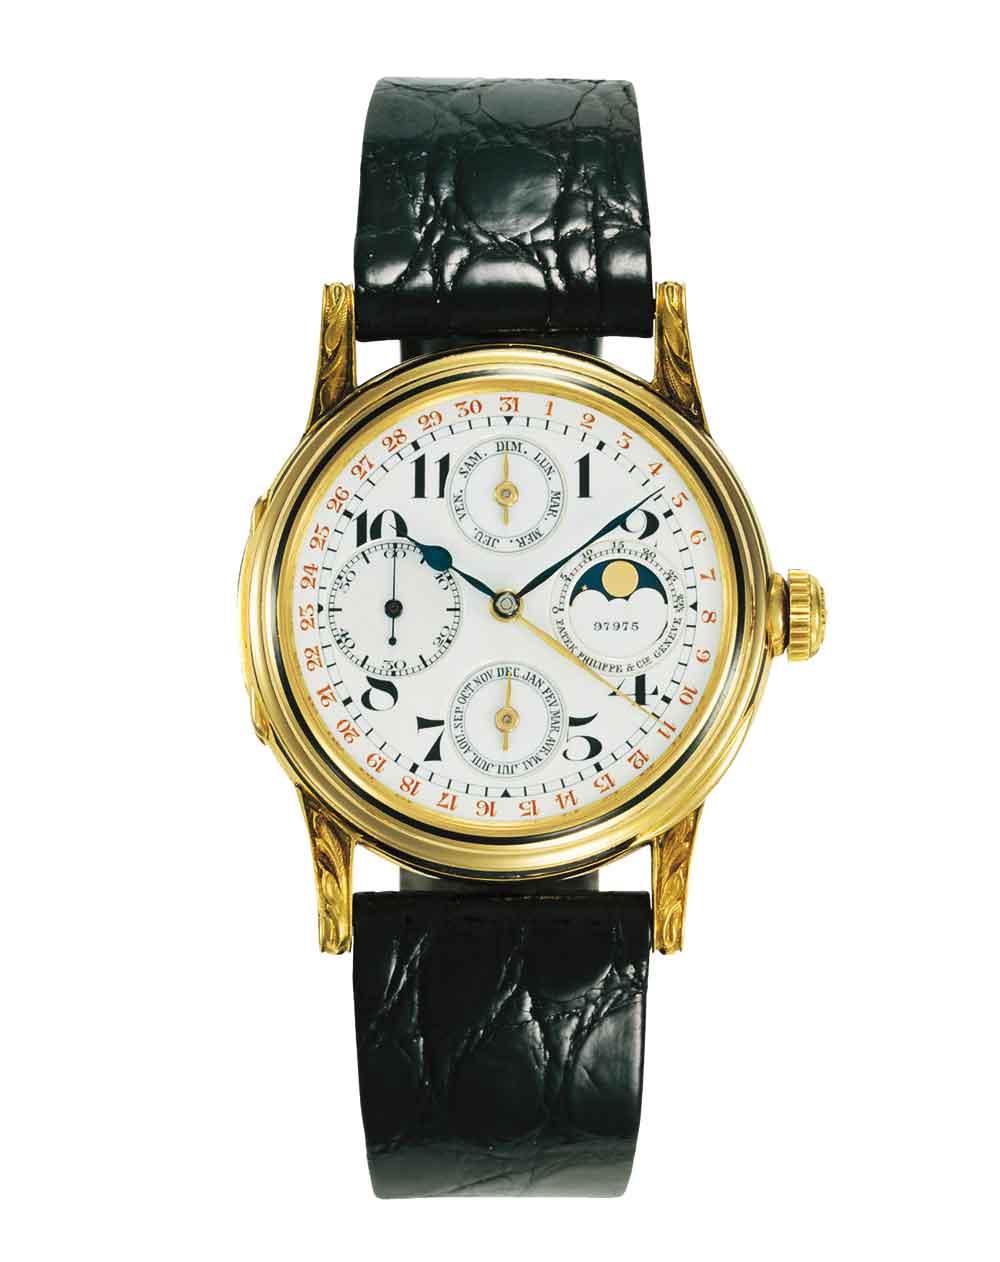 p0072_patek-philippe_the-first-wristwatch-with-perpetual-calendar_no_97975-jpg.1257584